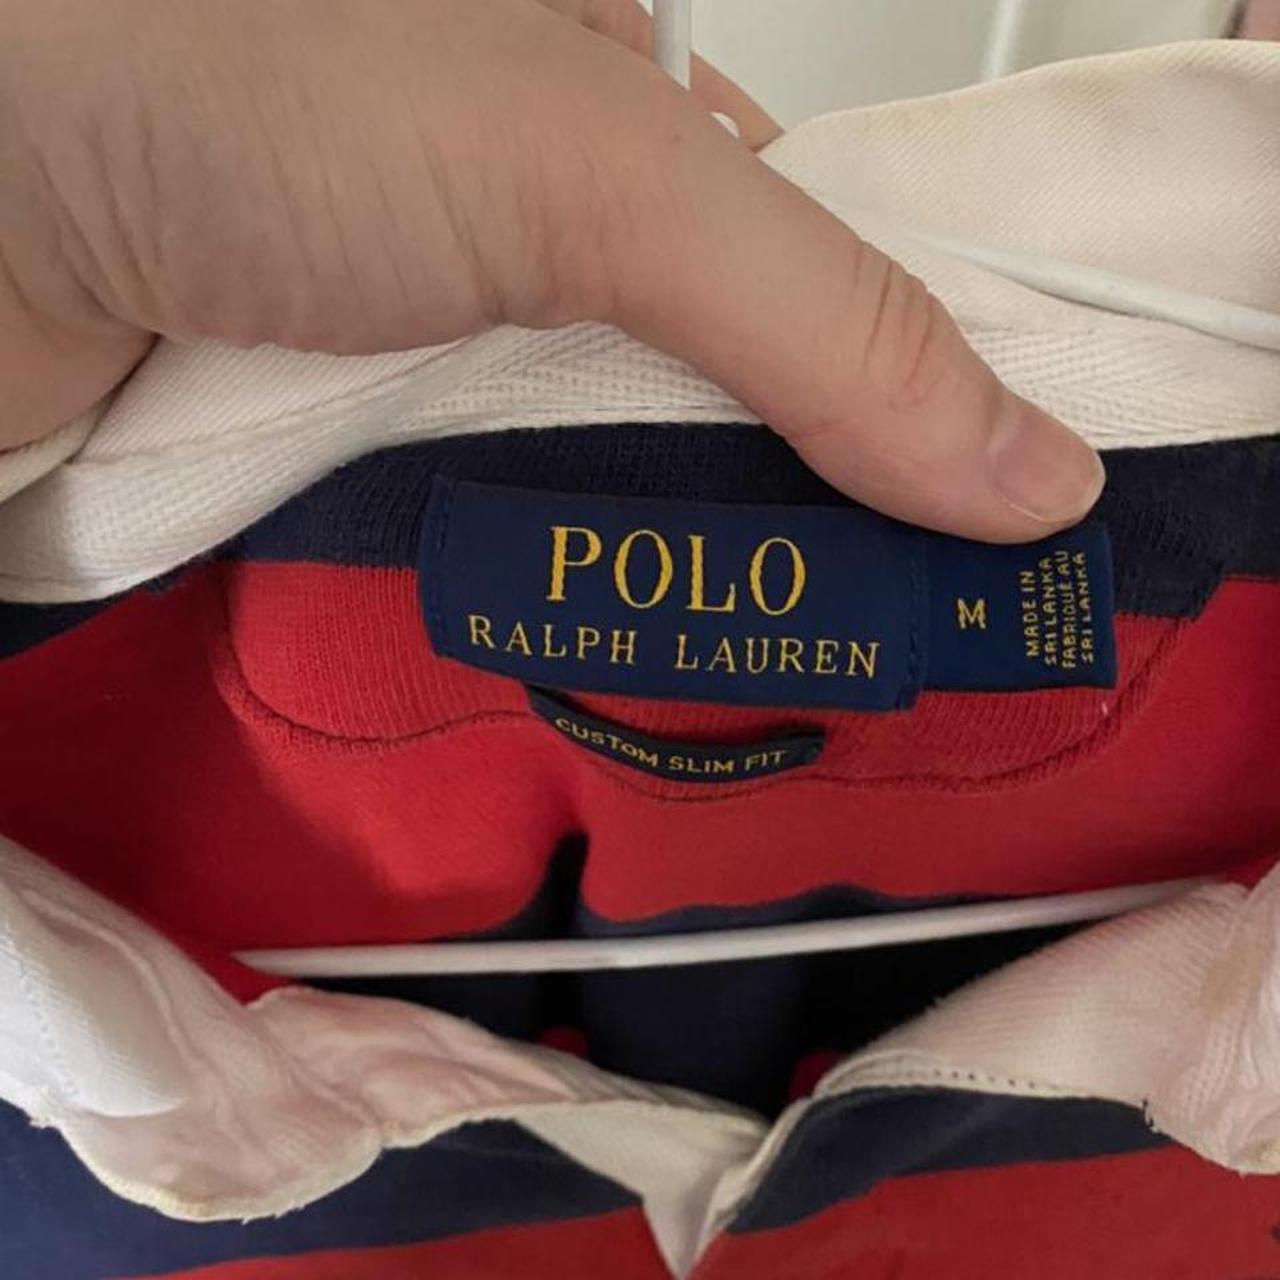 *instant buy is on* 🪩 ️‍🔥 POLO RALPH LAUREN RUGBY... - Depop